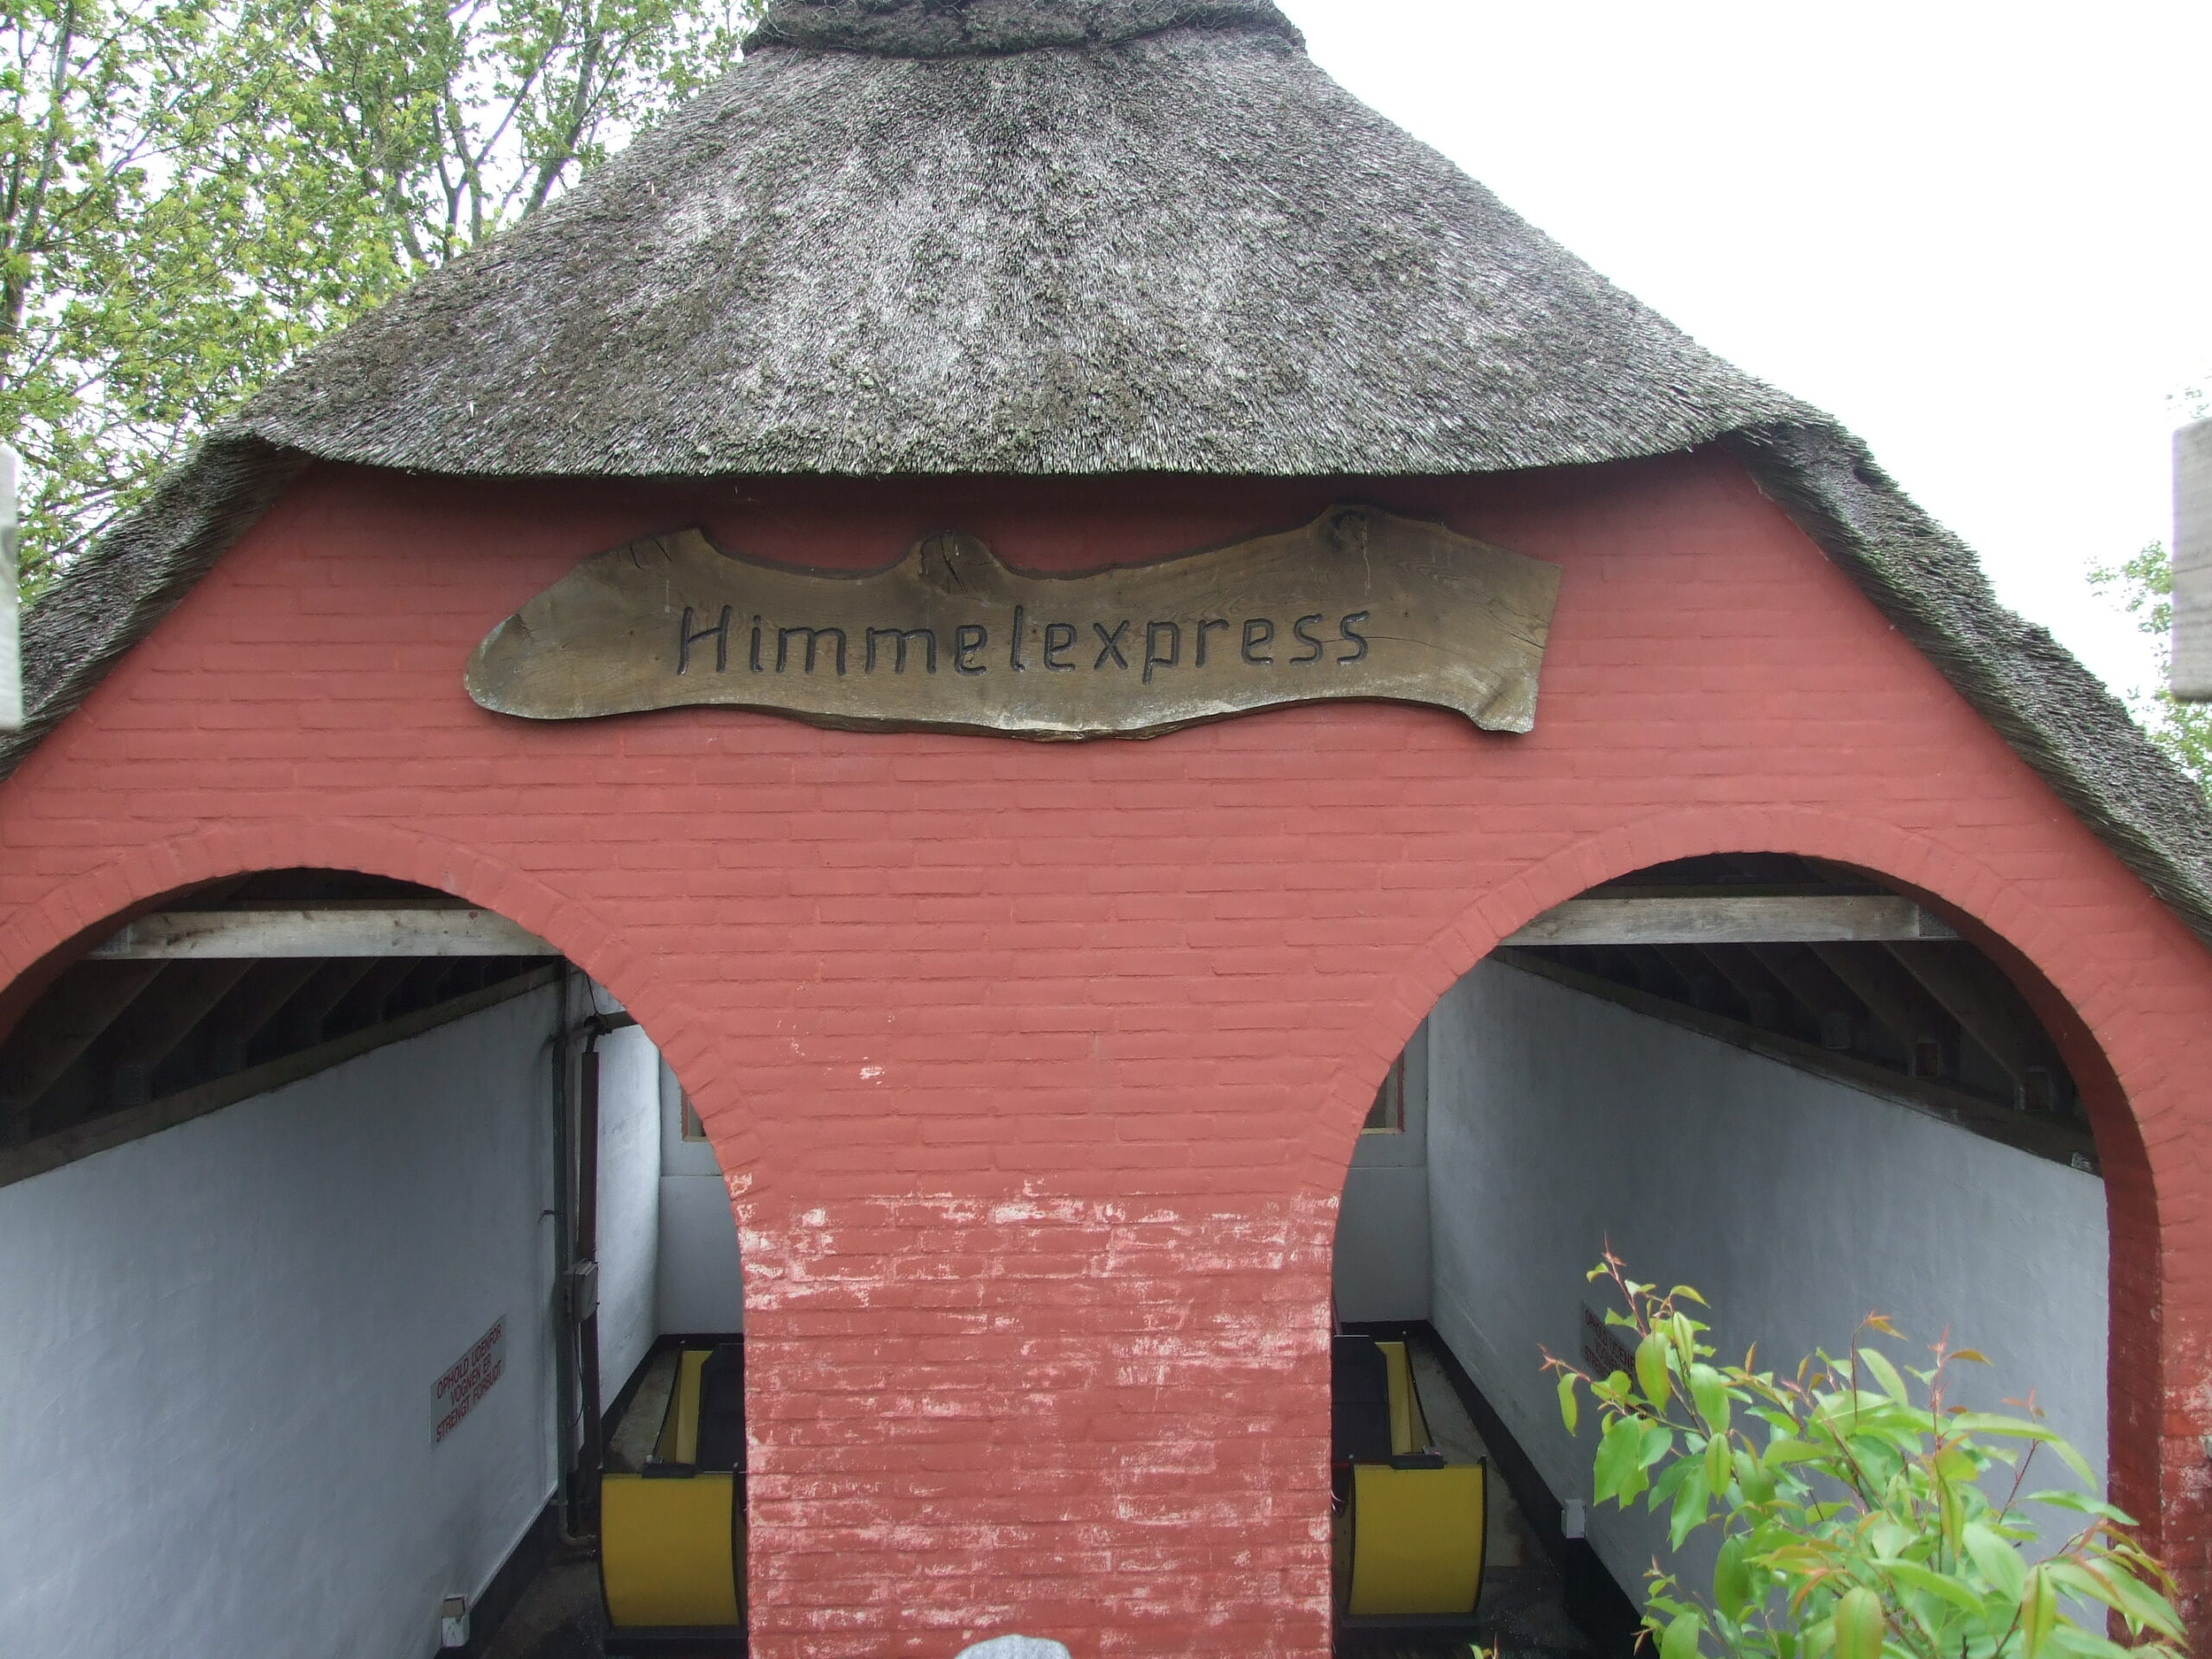 You are currently viewing Himmelexpress (right) ( Rømø Lege- & Hesteland)